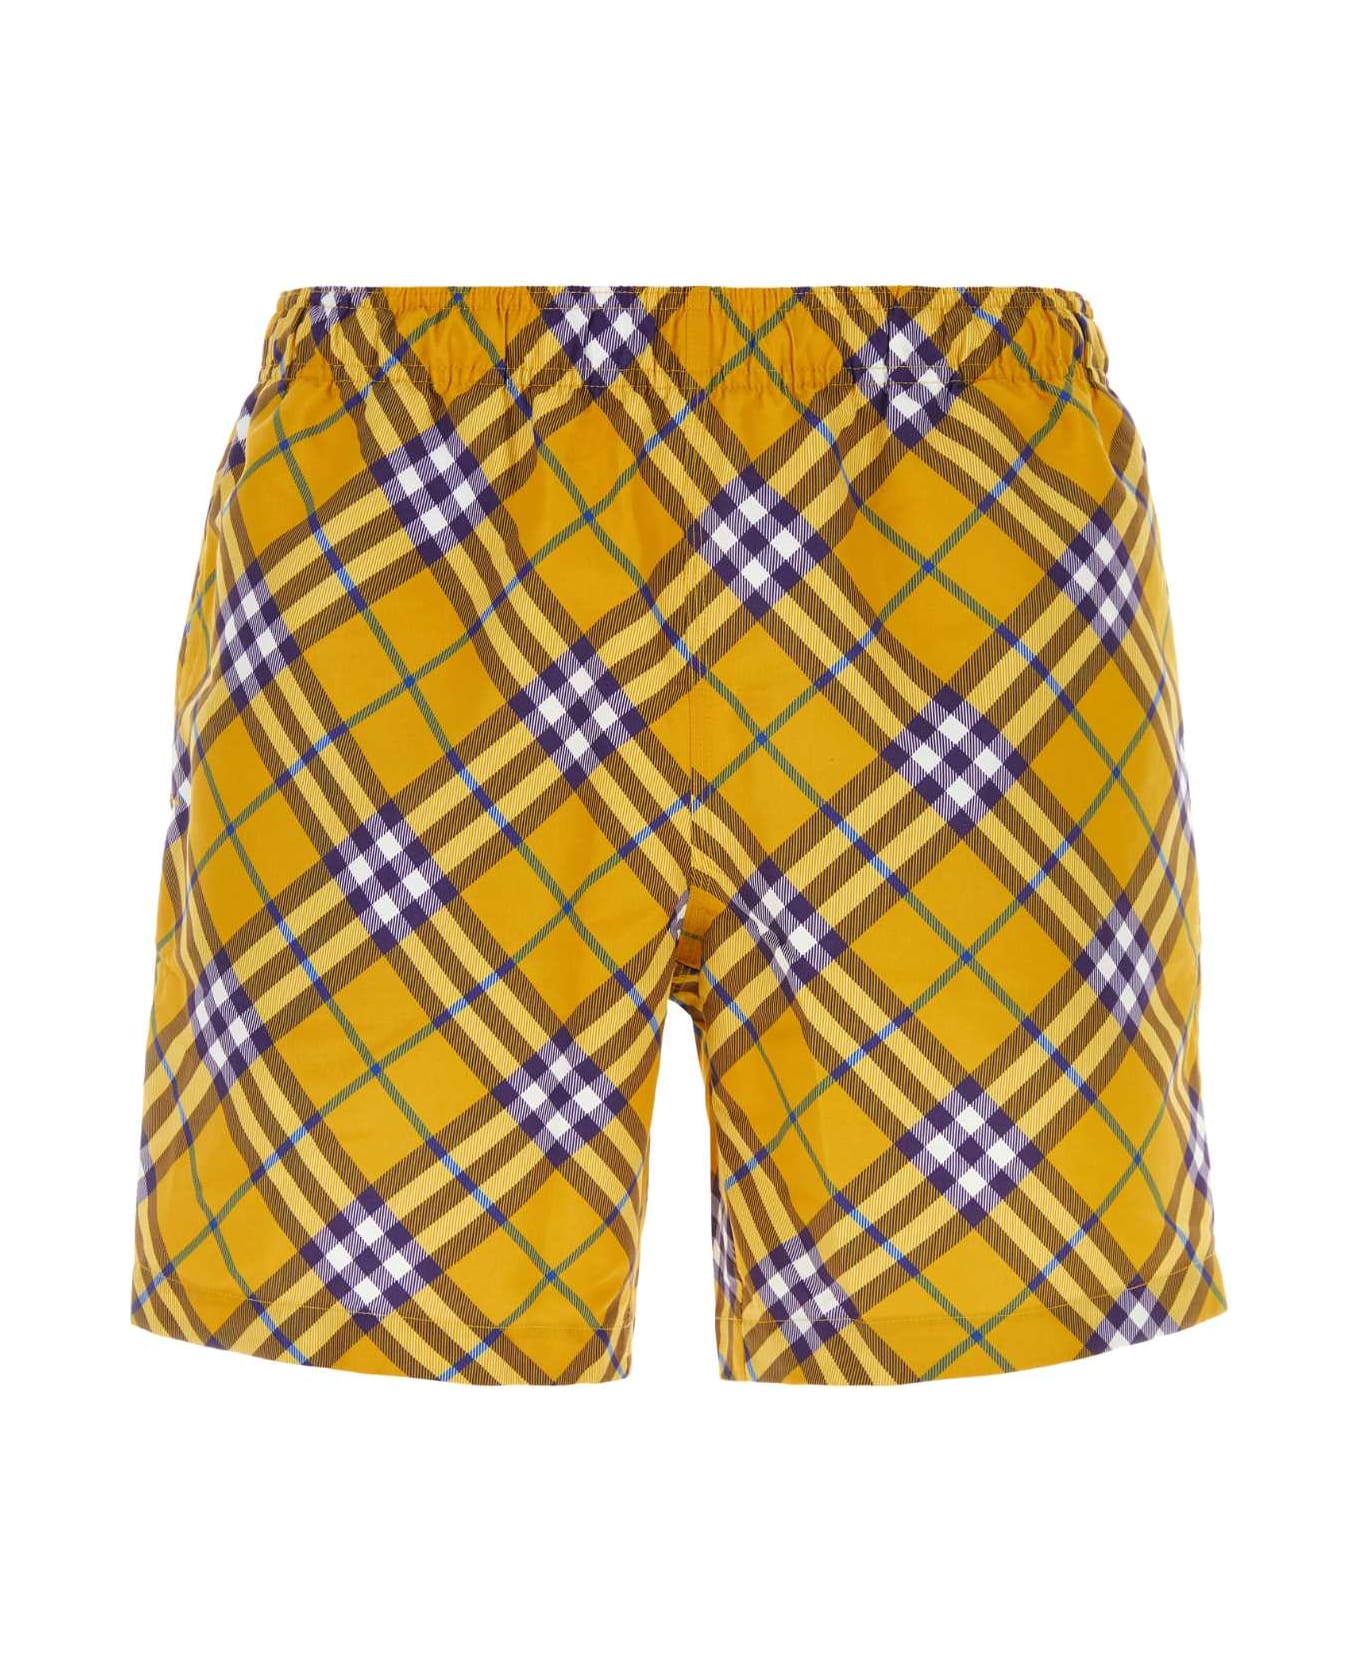 Burberry Printed Polyester Swimming Shorts - PEAR